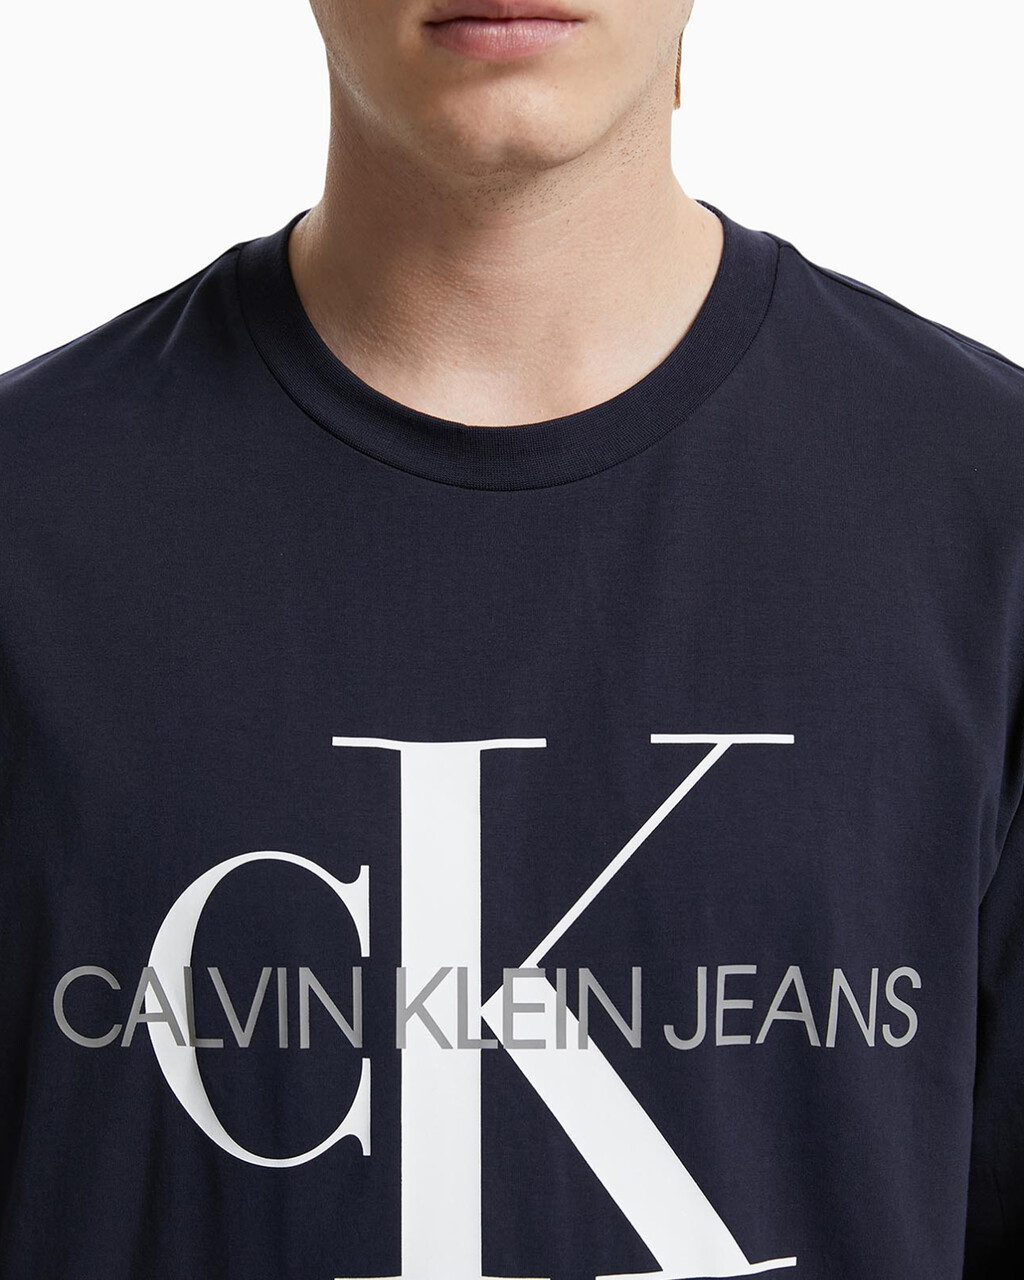 Buy Calvin Klein Golf Assorted Long Sleeve T-Shirts 3 Pack from